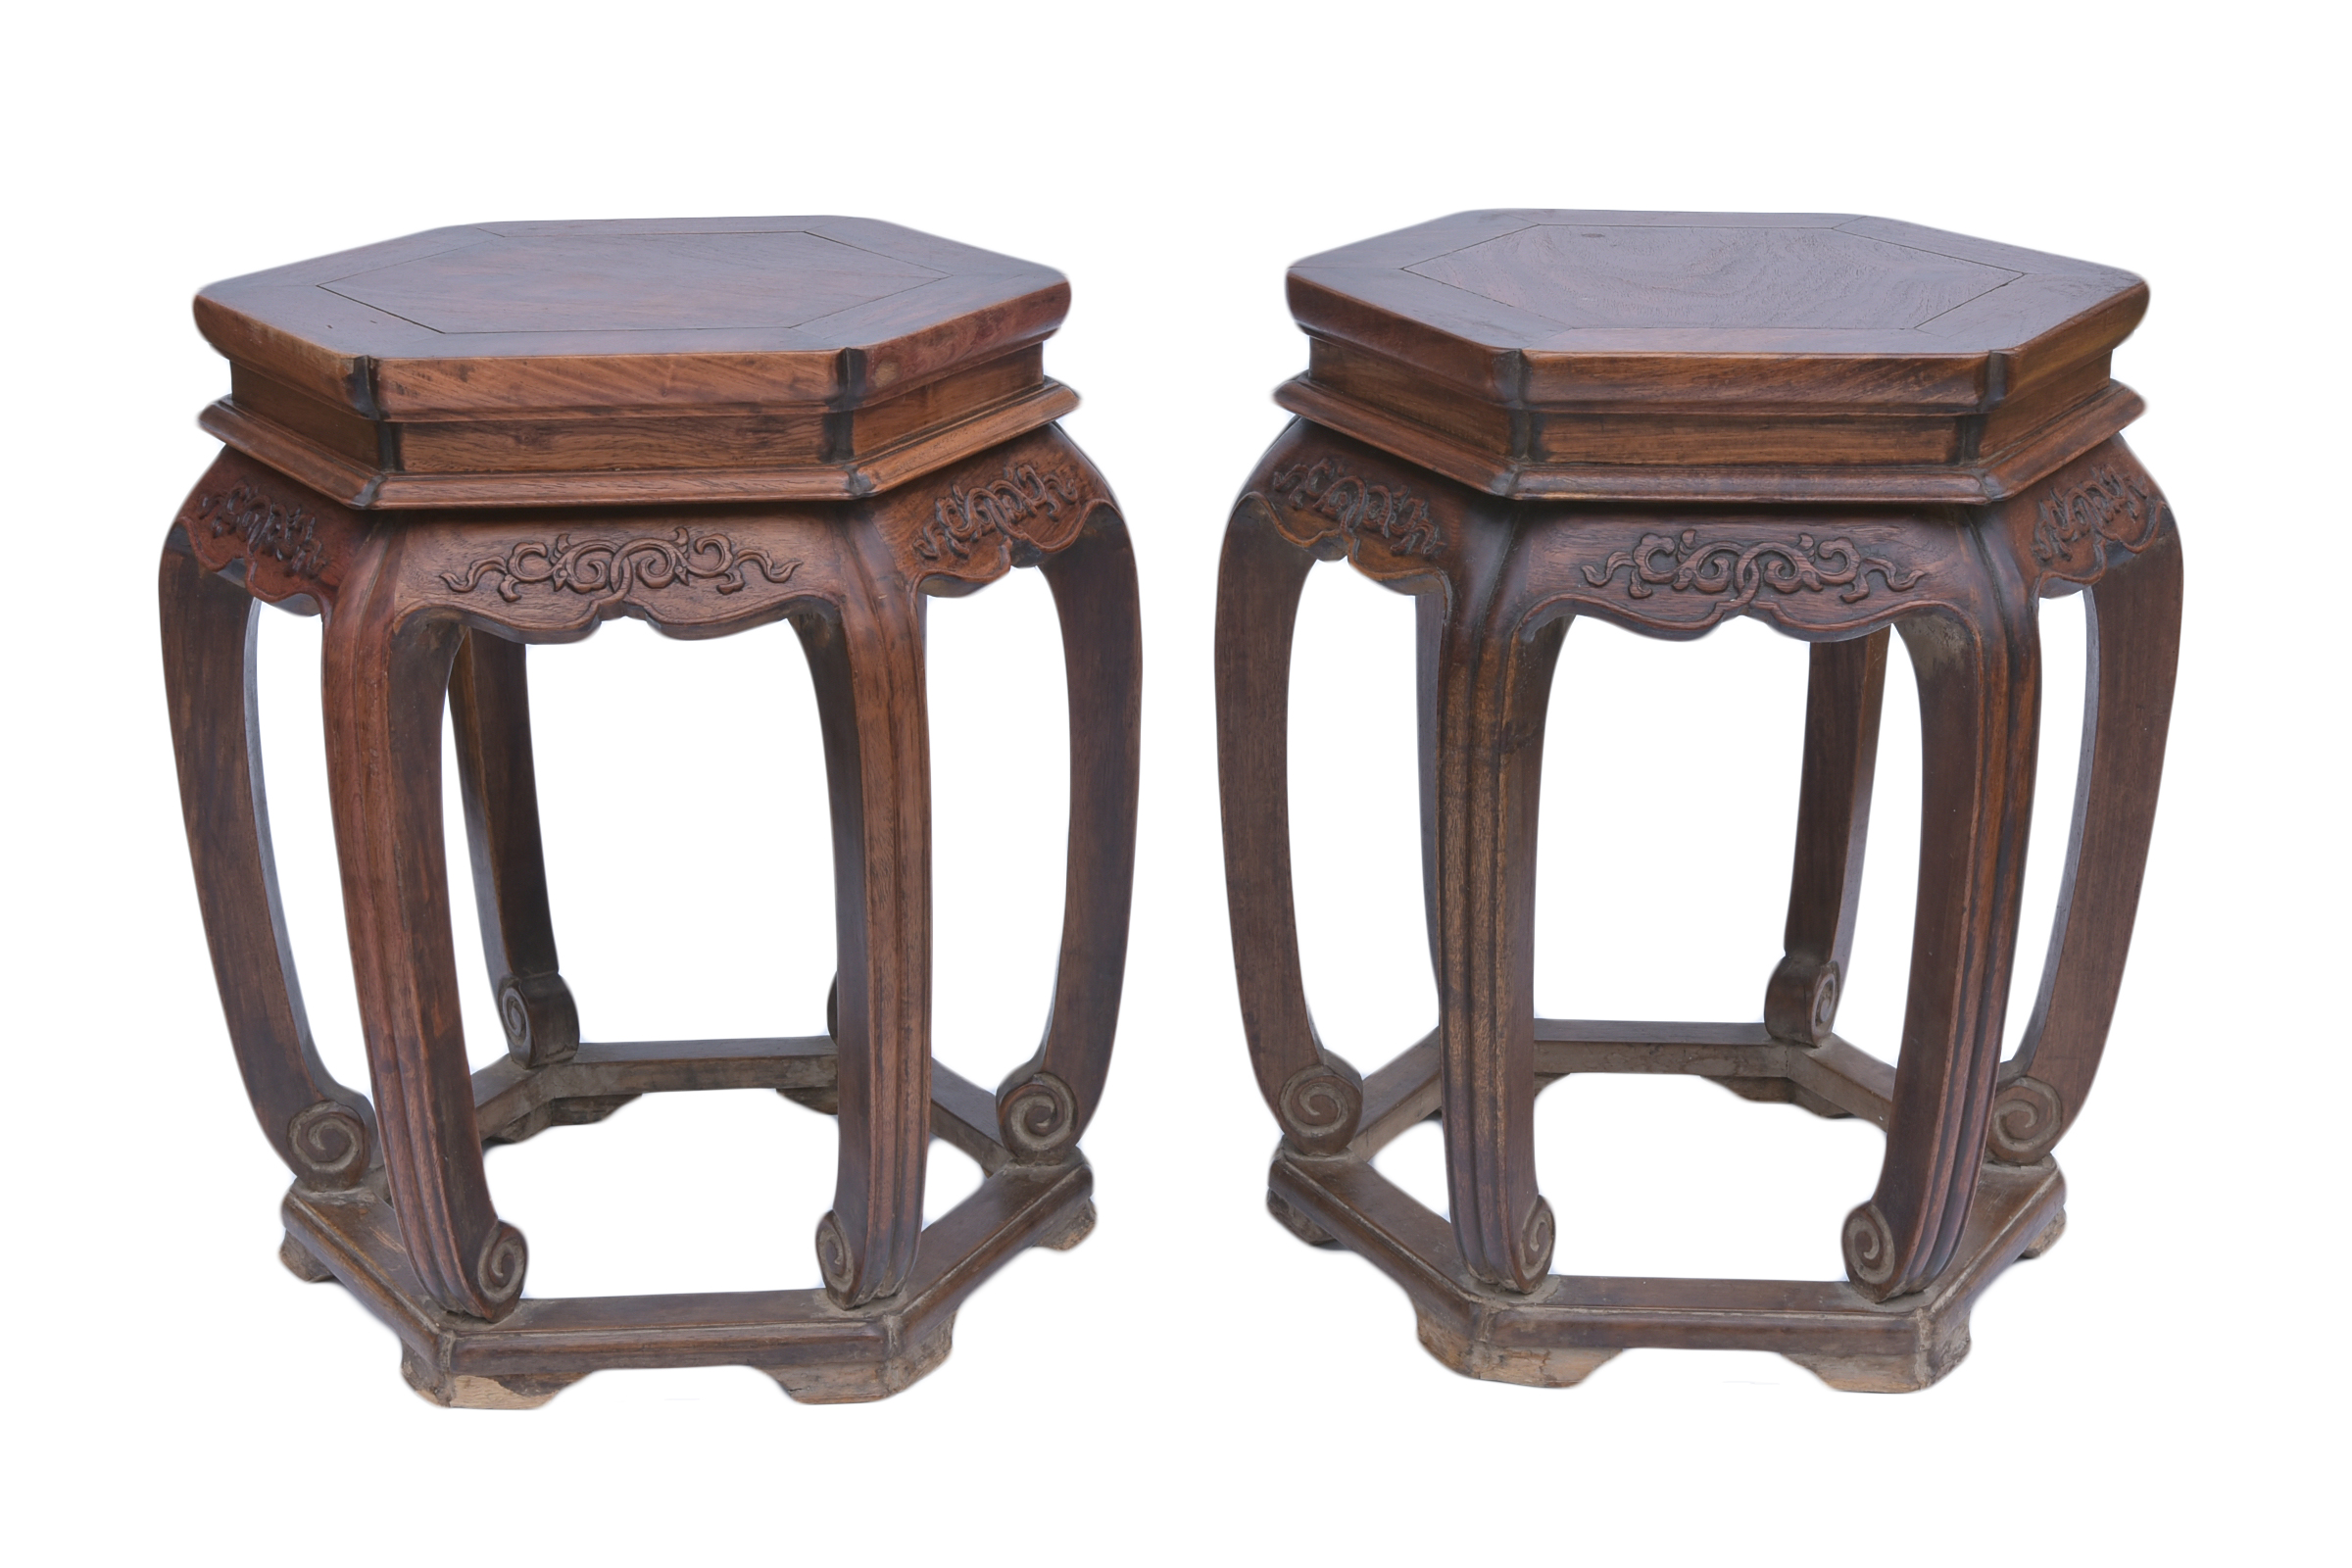 A pair of Chinese 19th century hardwood stools wit